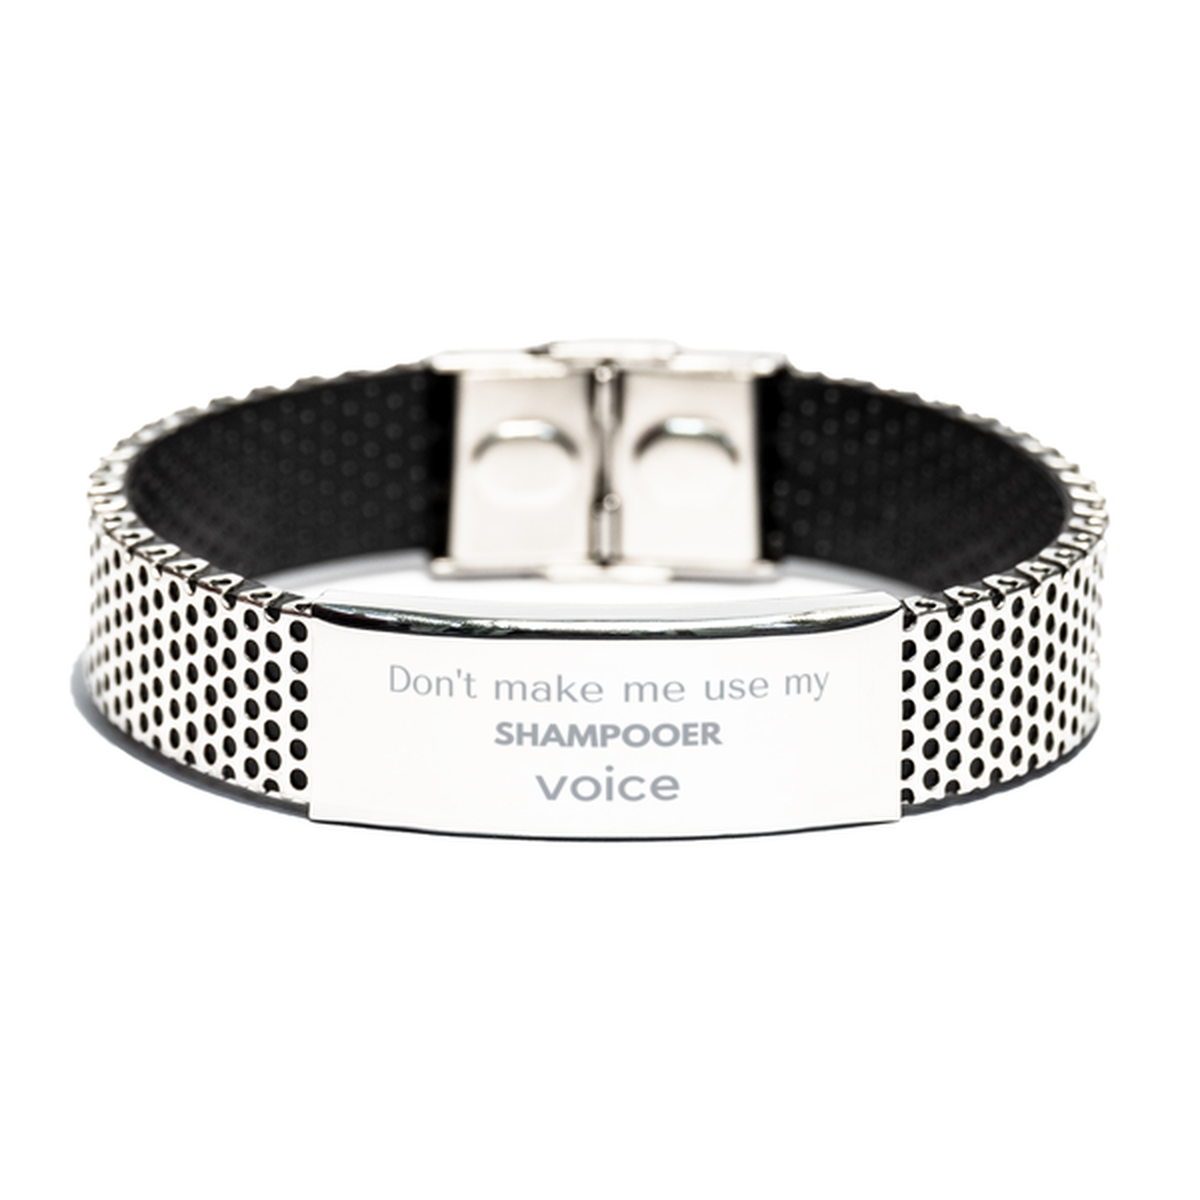 Don't make me use my Shampooer voice, Sarcasm Shampooer Gifts, Christmas Shampooer Stainless Steel Bracelet Birthday Unique Gifts For Shampooer Coworkers, Men, Women, Colleague, Friends